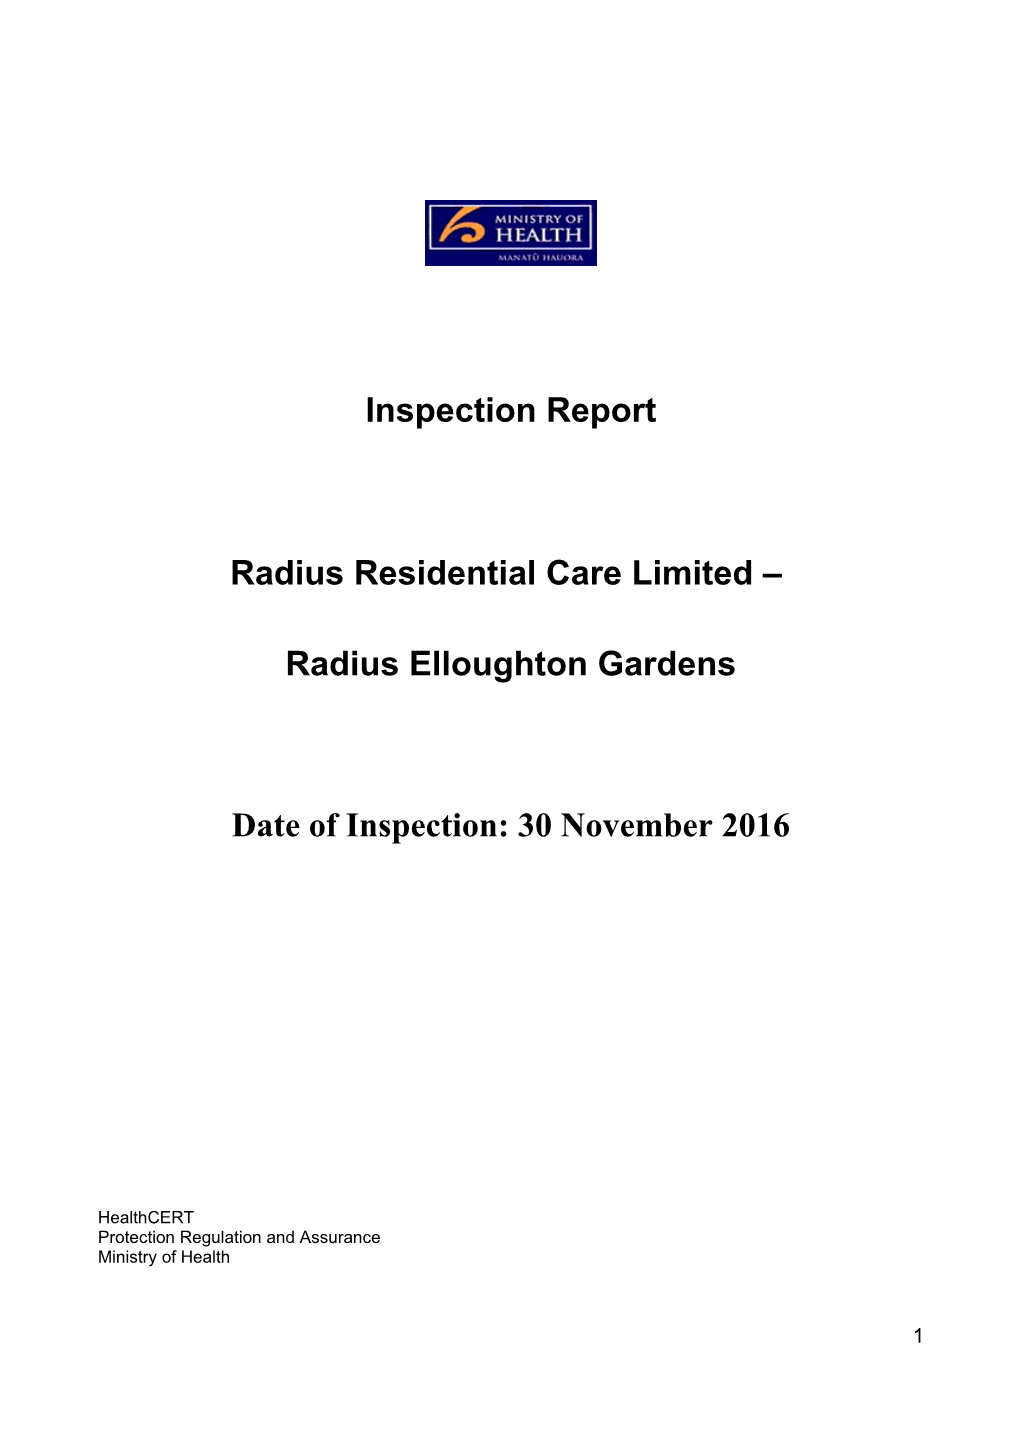 Radius Residential Care Limited